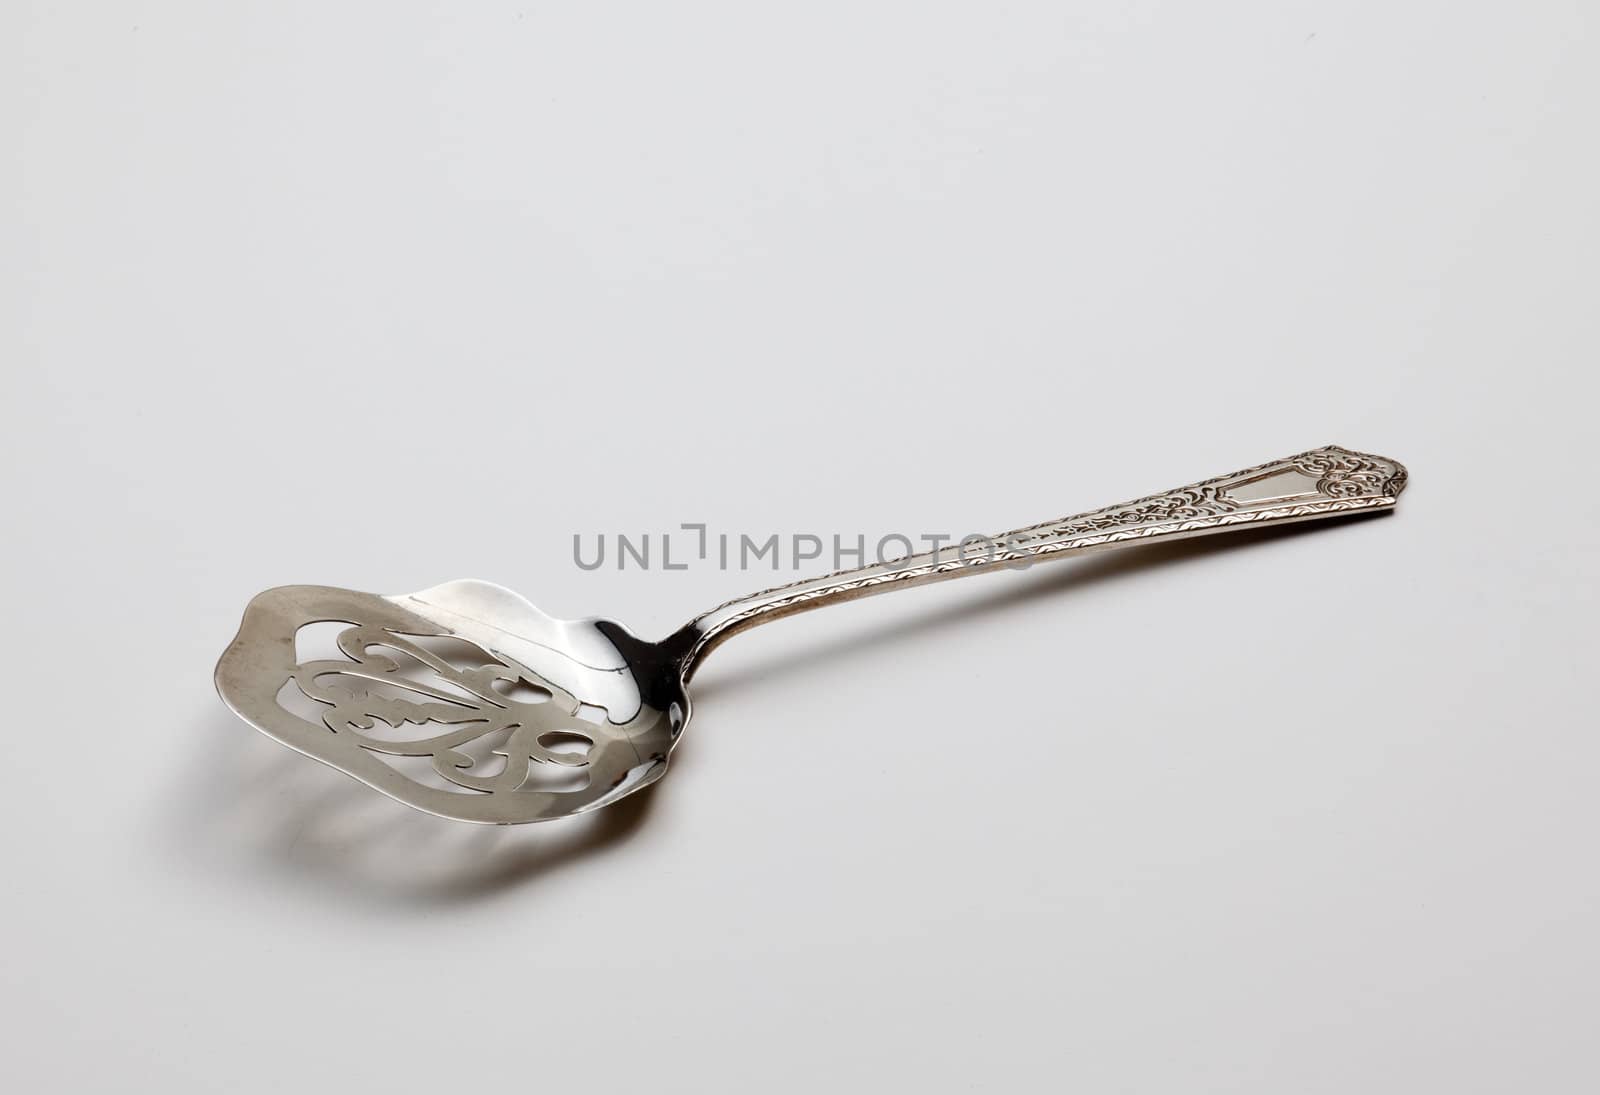 Antique sterling silver cake spoon by steheap